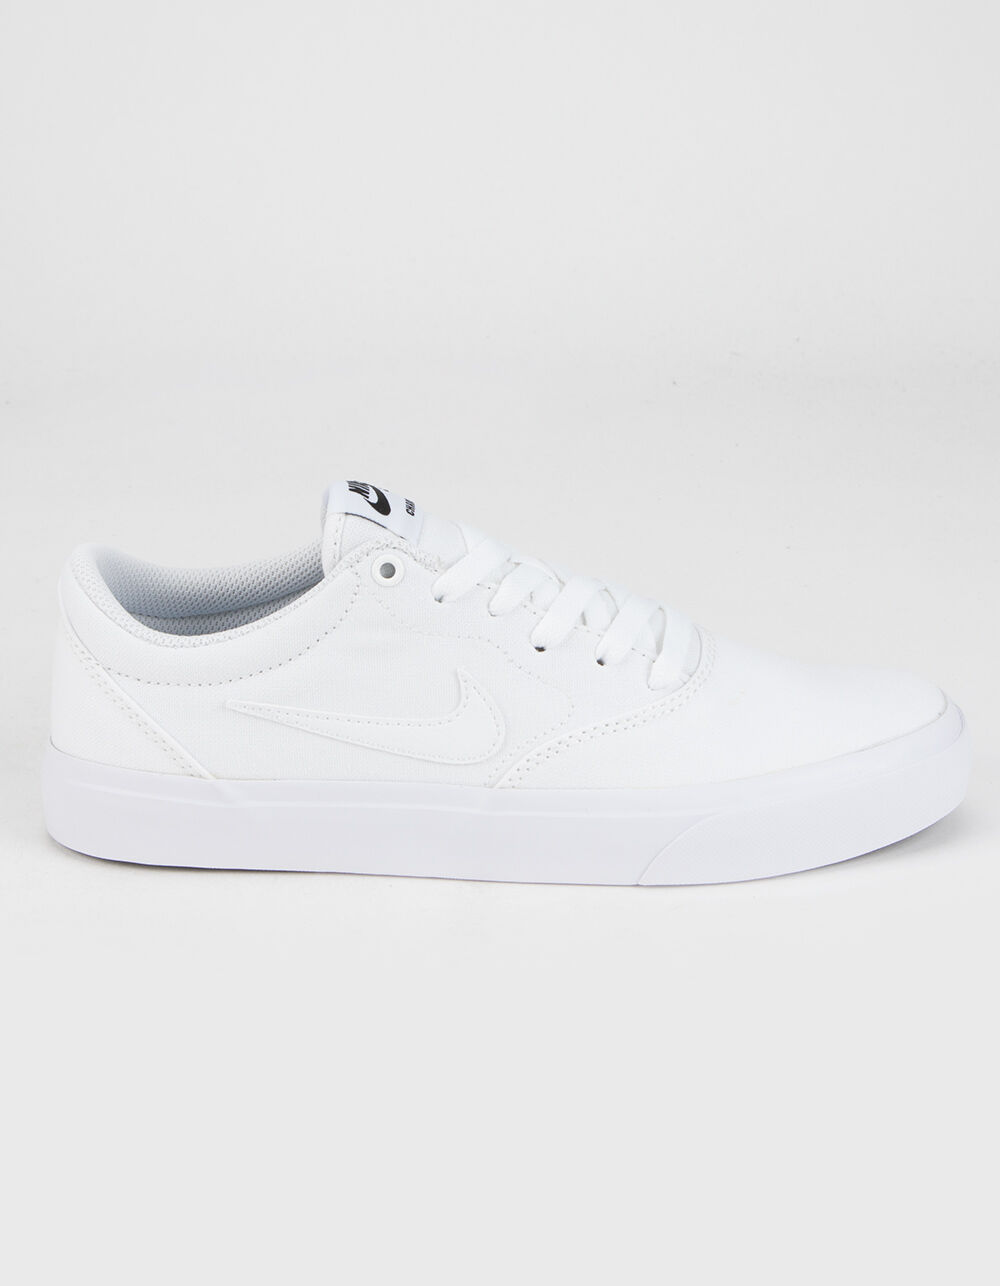 pols Hick Optimisme NIKE SB Charge Canvas Womens Shoes - WHITE | Tillys